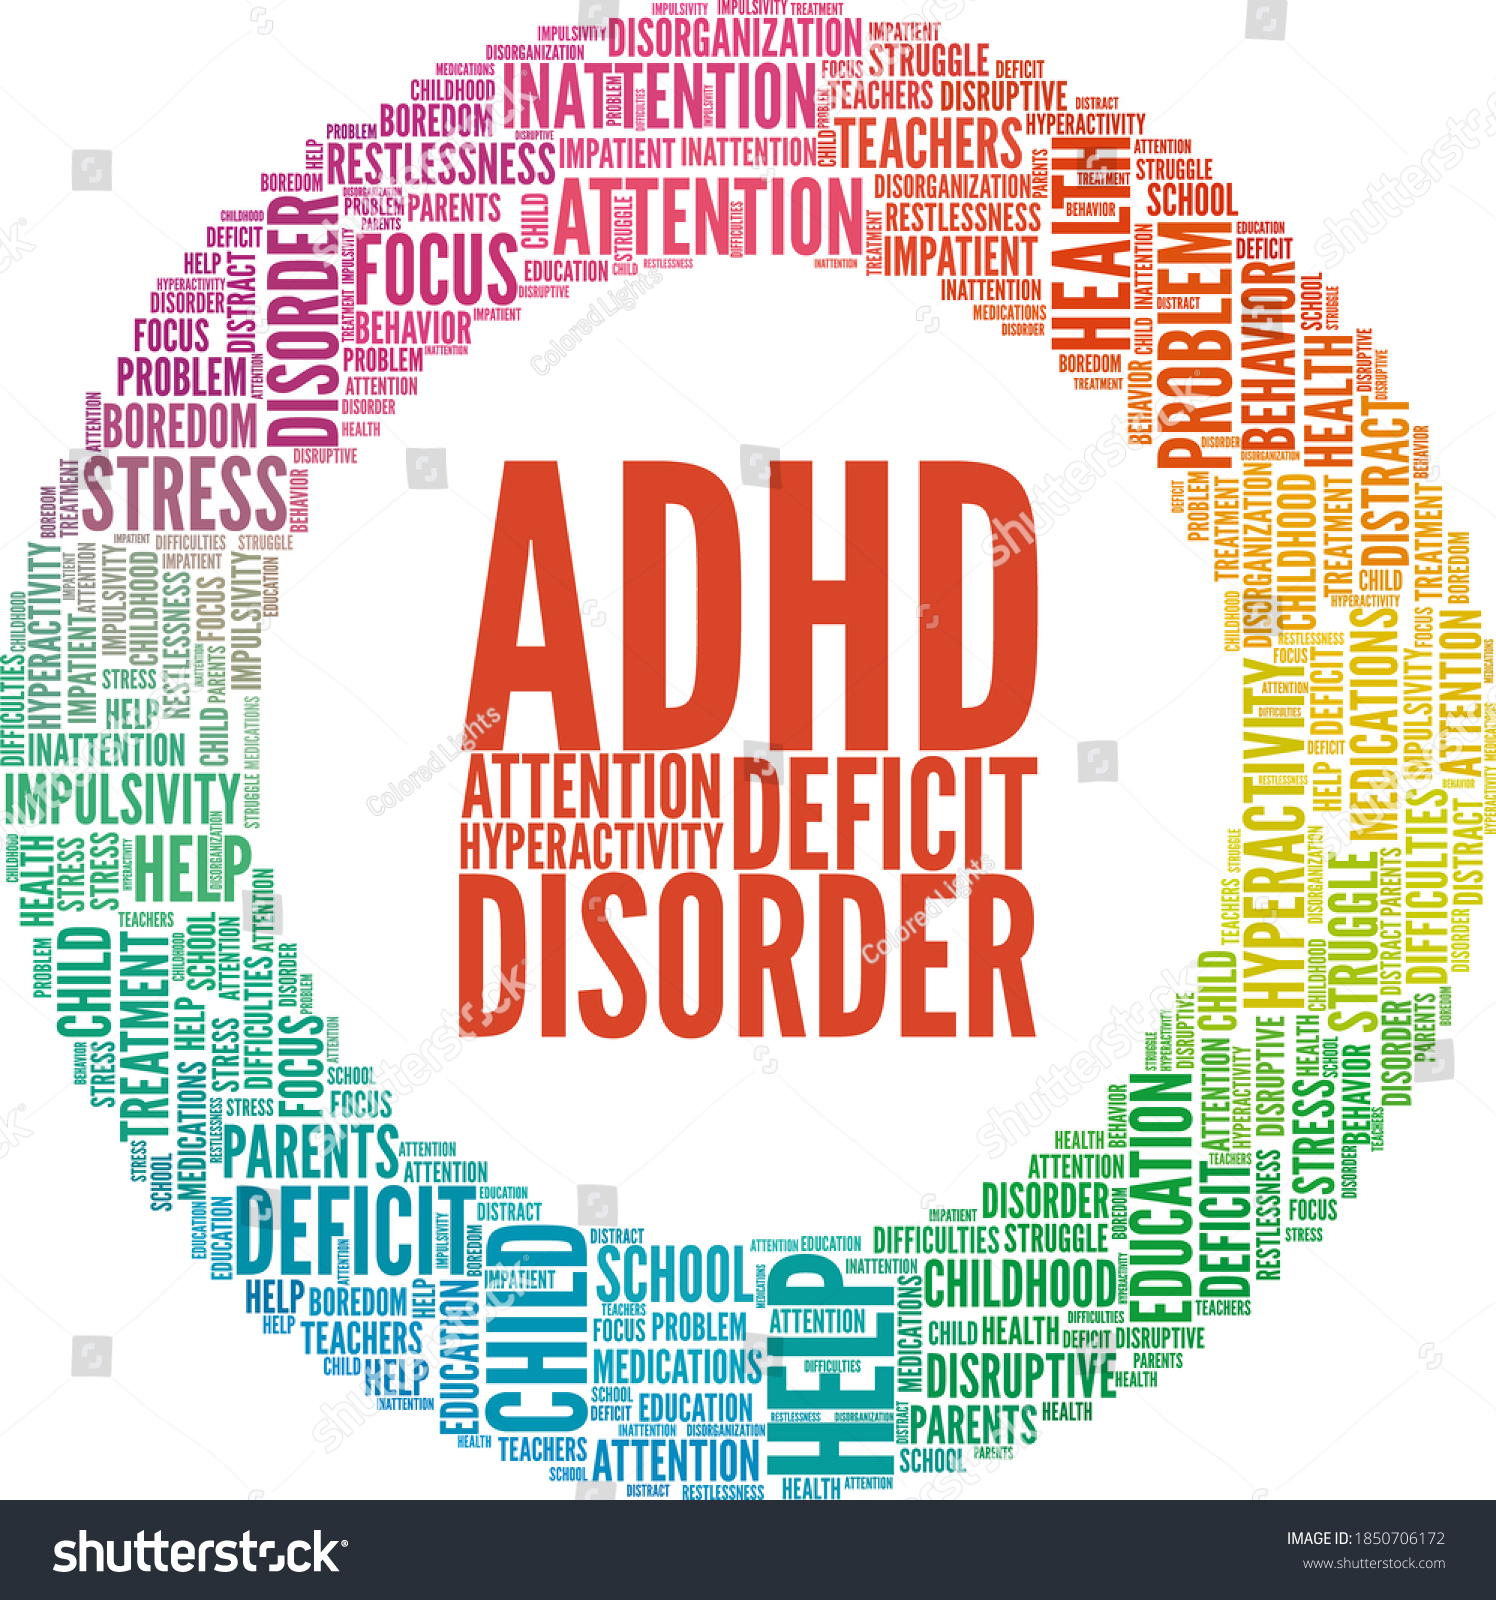 Adhd Attention Deficit Hyperactivity Disorder Vector Stock Vector ...